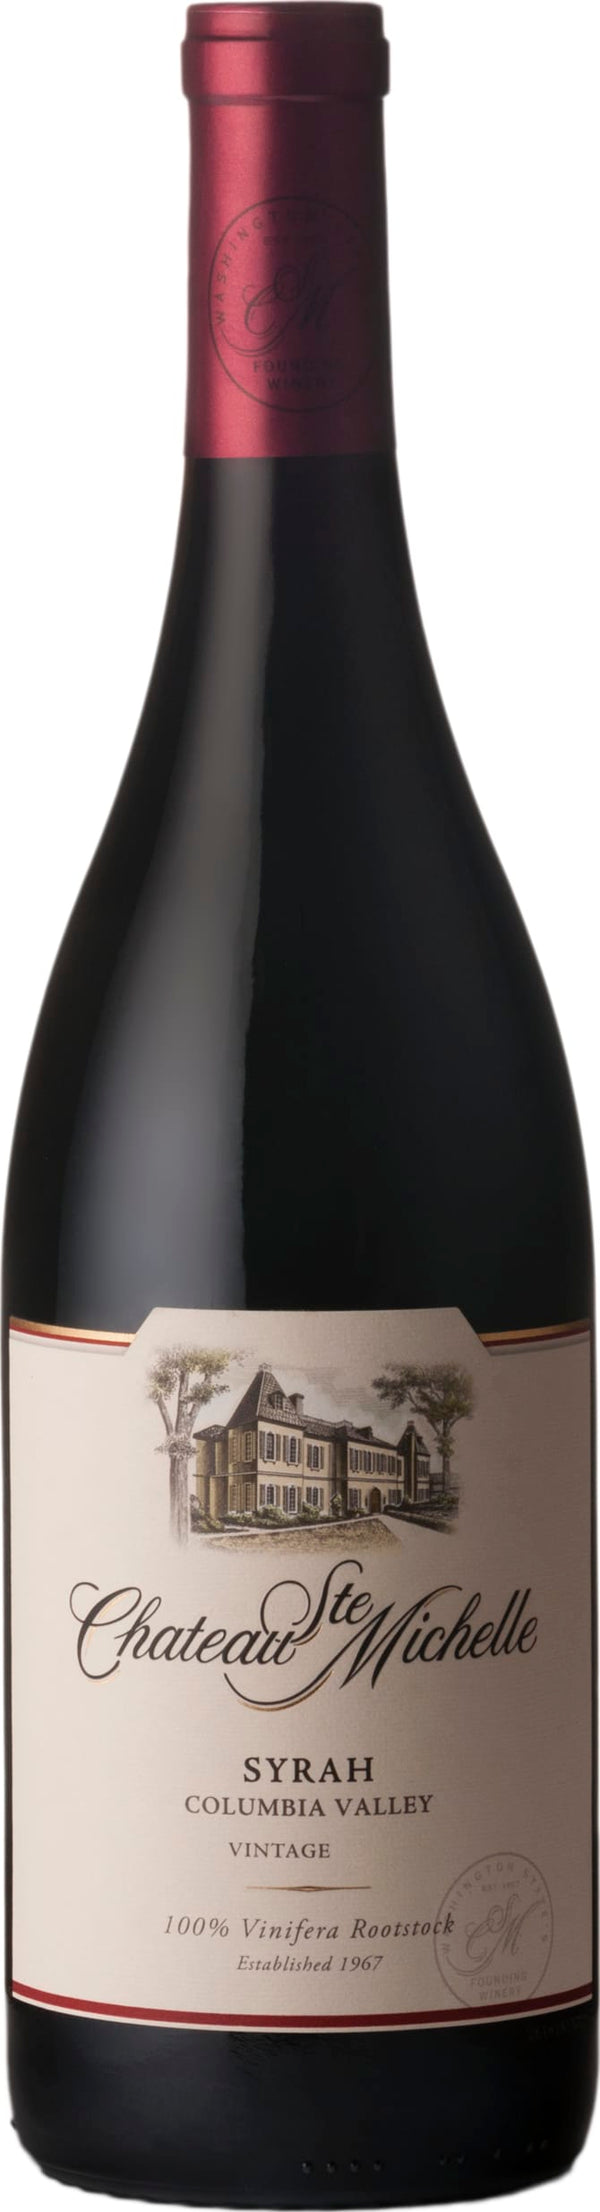 Chateau Ste Michelle Columbia Valley Syrah 2019 6x75cl - Just Wines 